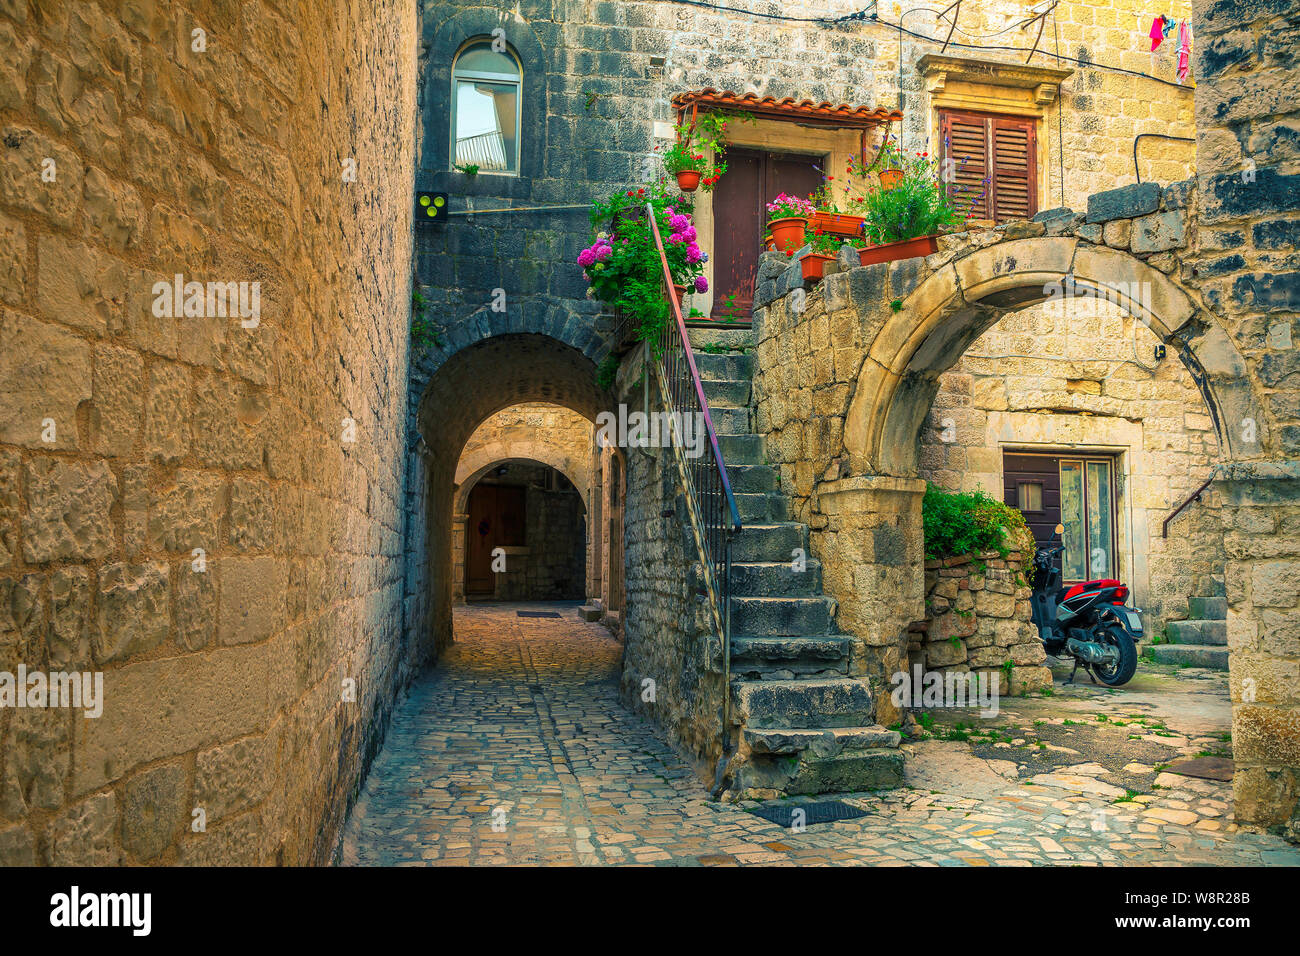 Picturesque narrow street with stone houses. Rustic stone houses and entrances decorated with flowers. Cozy street with antique houses and narrow alle Stock Photo